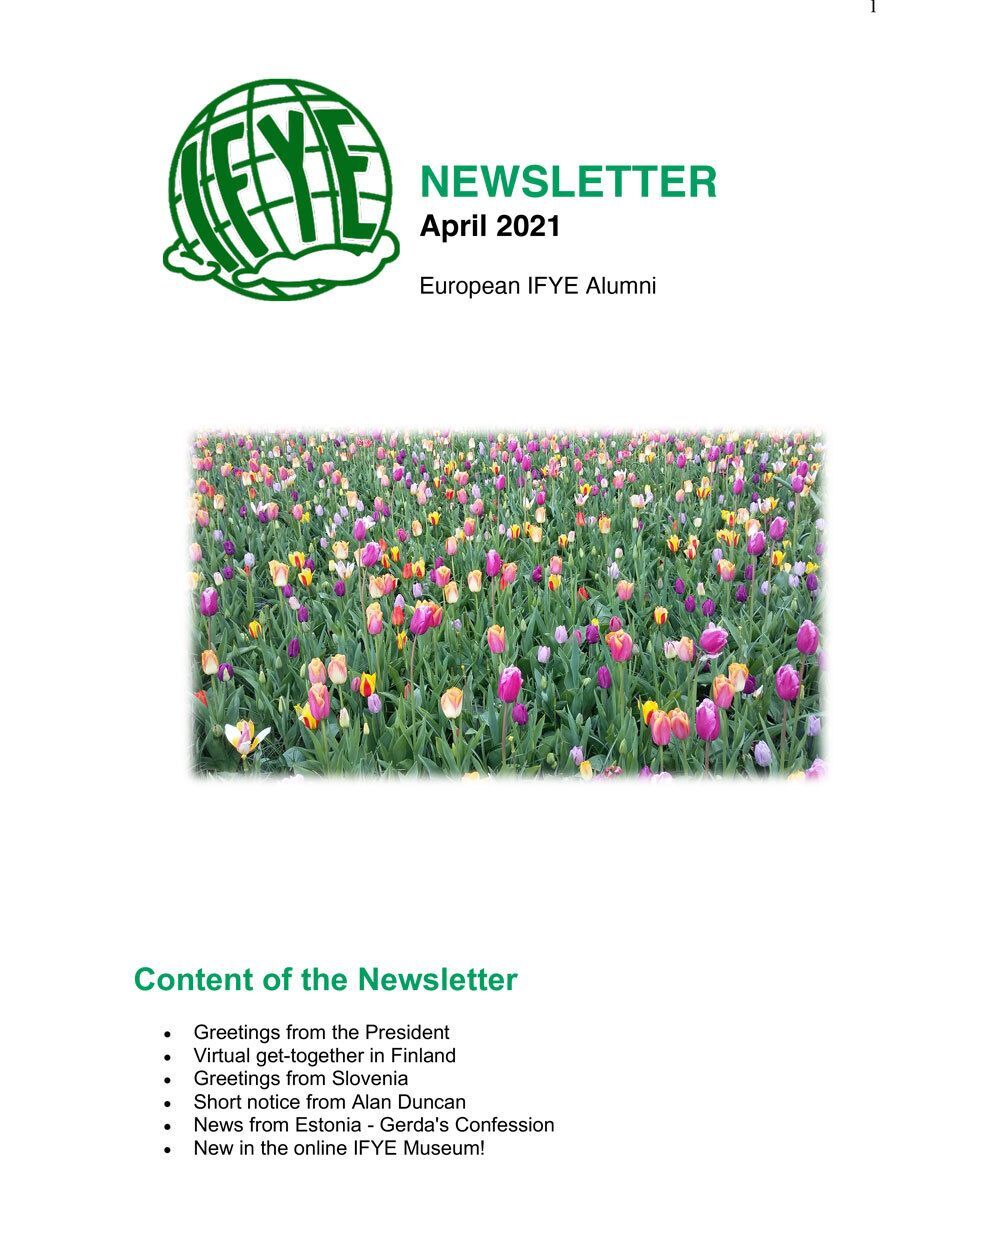 Read the Global April 2021 Newsletter